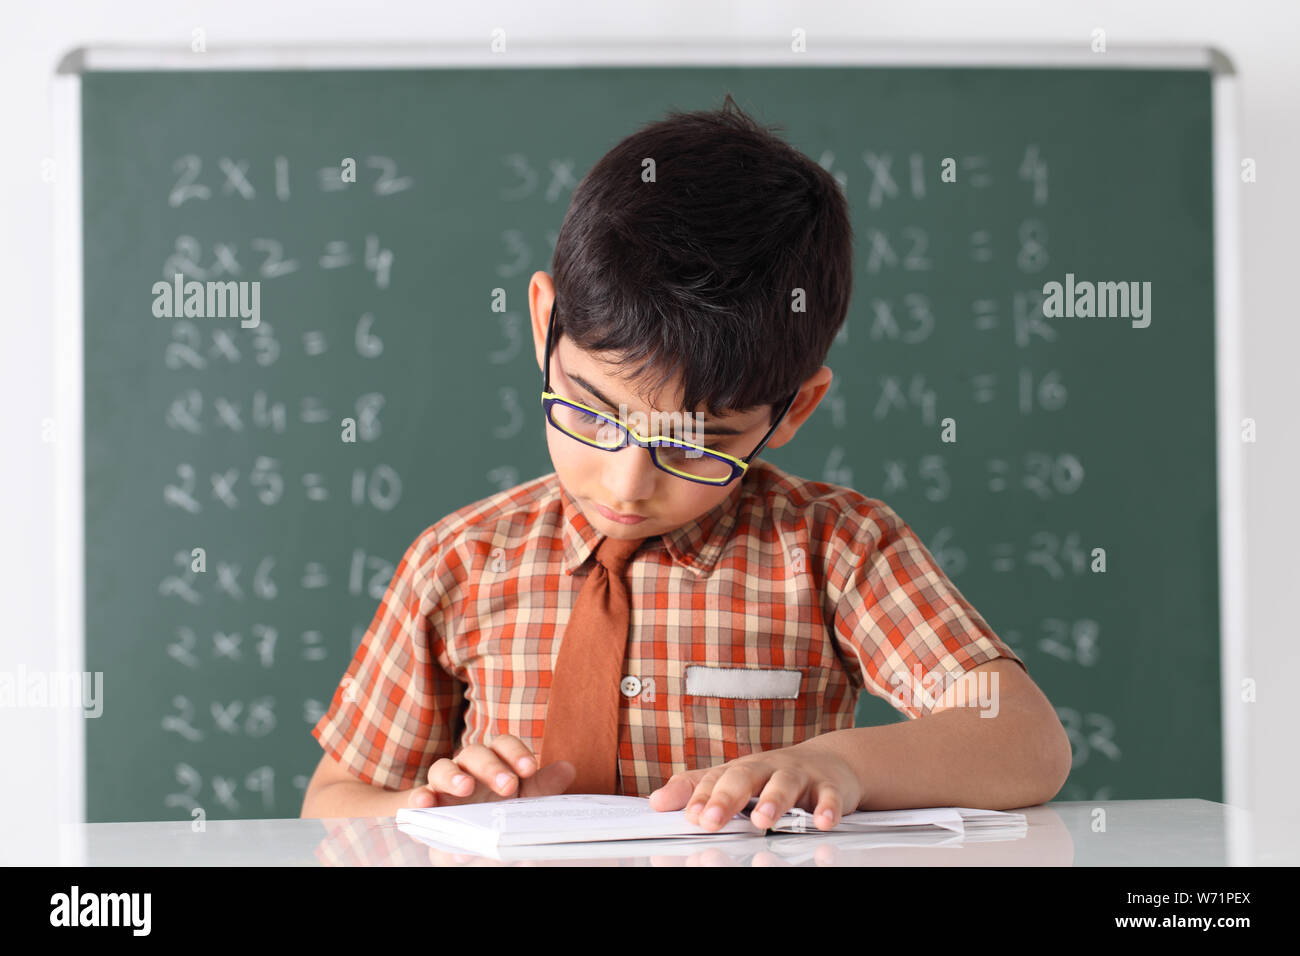 Schoolboy studying in a classroom Stock Photo